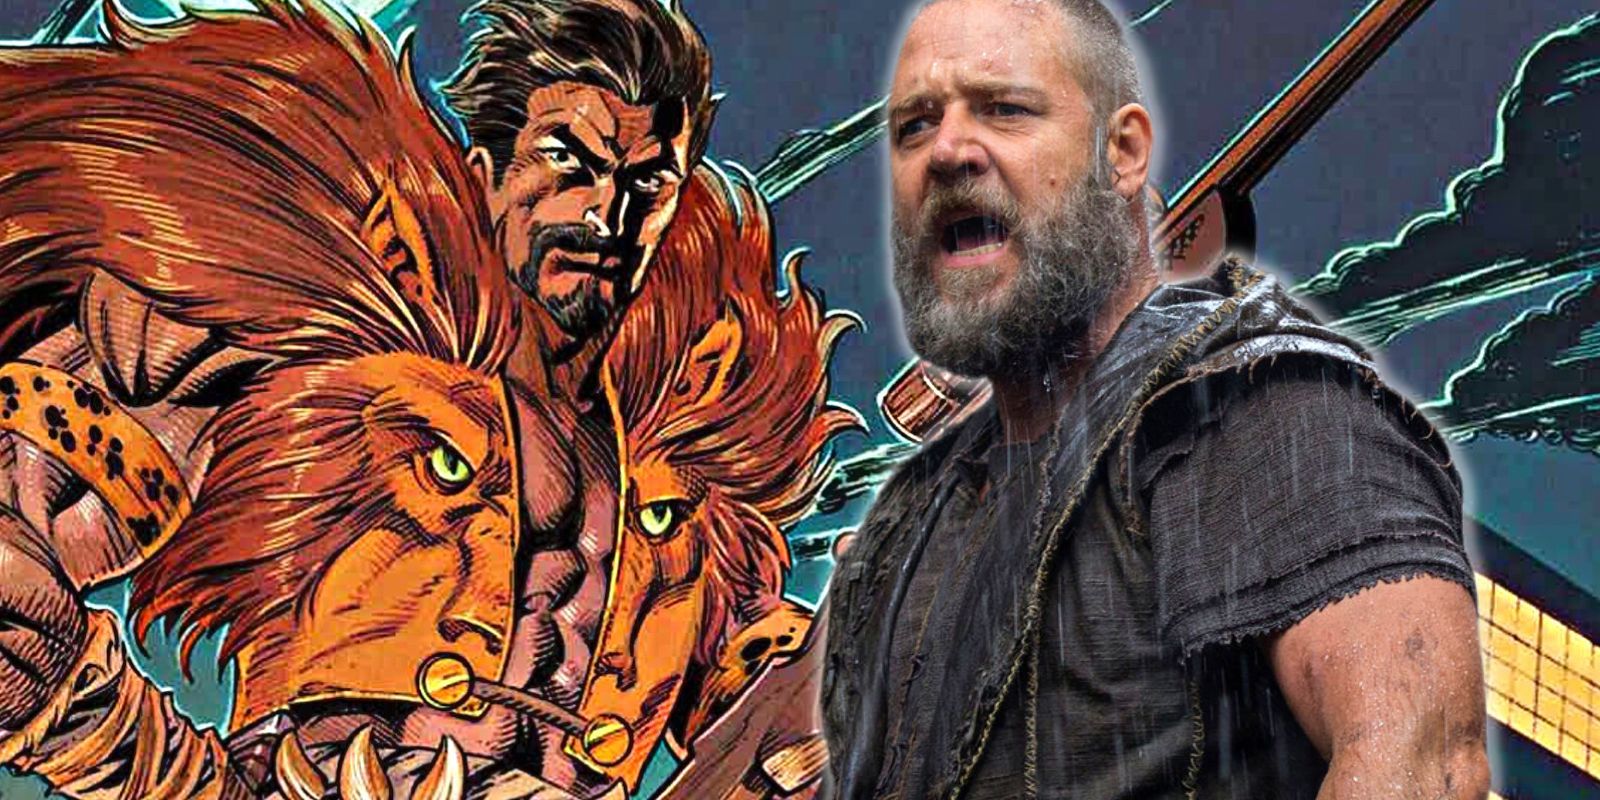 Russell Crowe screaming at a smug Kraven the Hunter